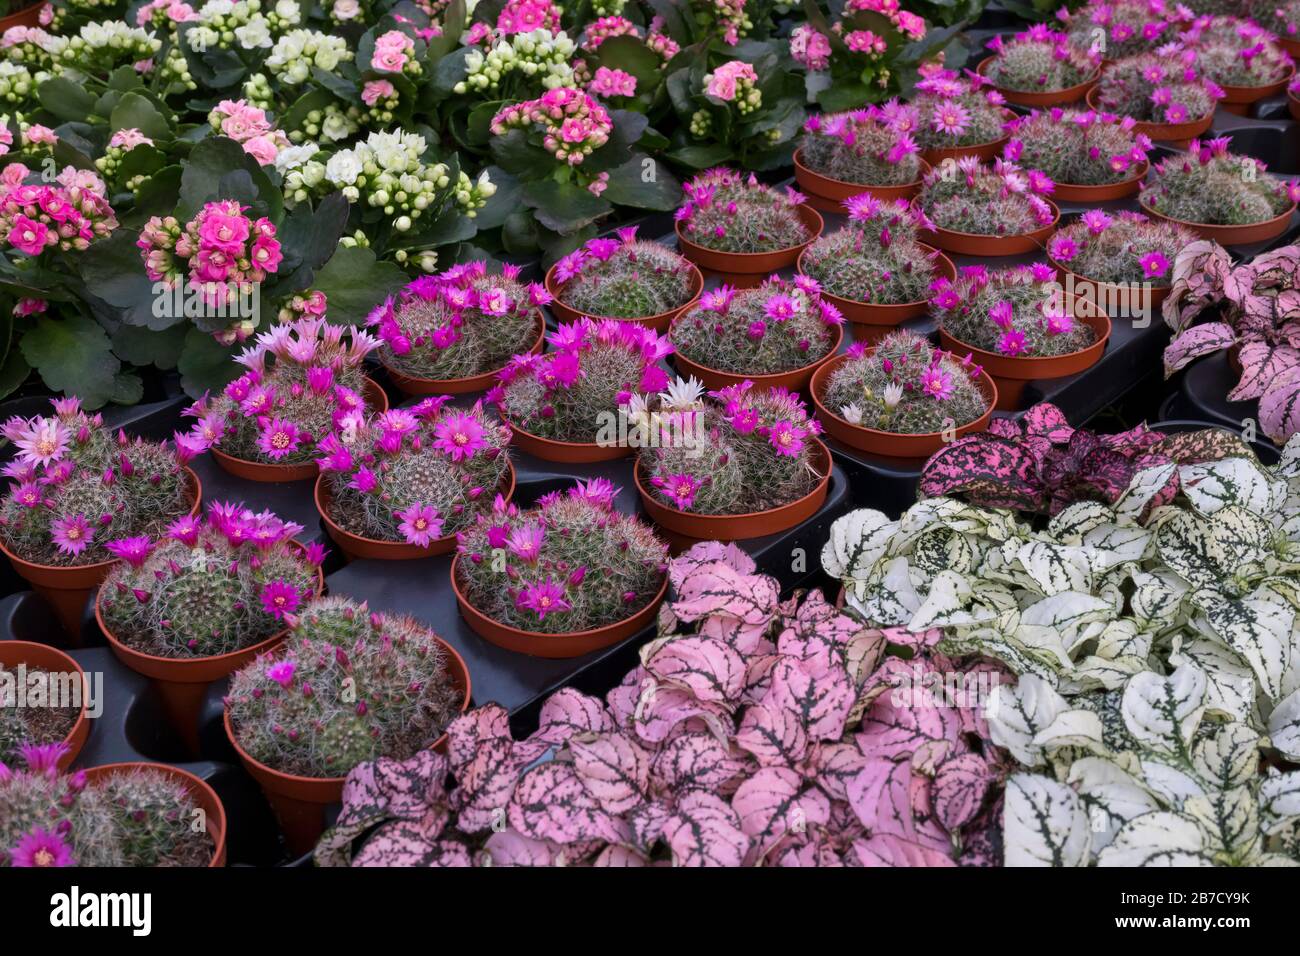 Variety of mini plants at the market for sale Stock Photo